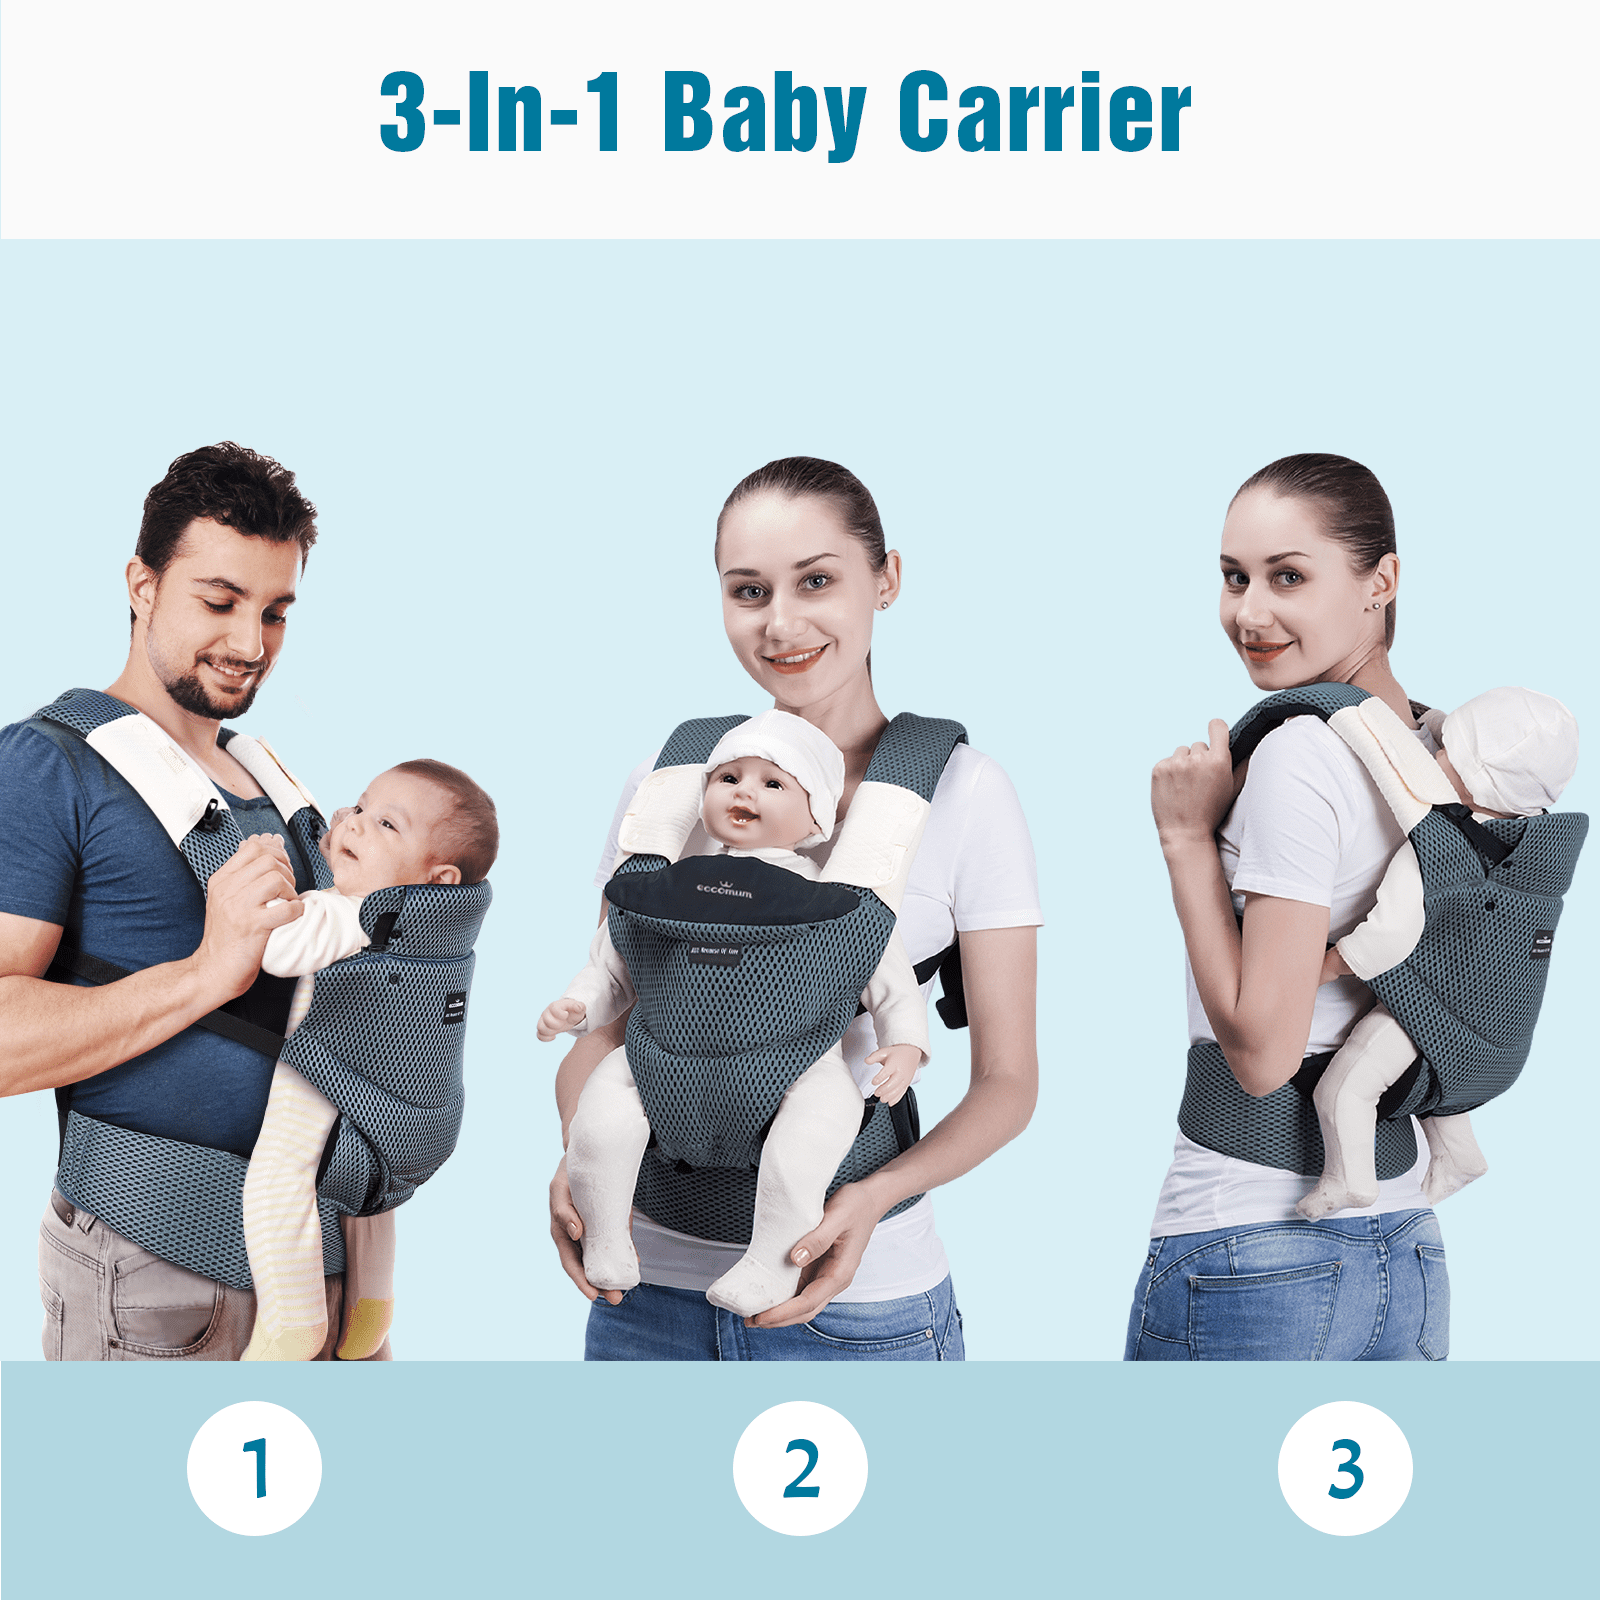 Removable Newborn Infant Baby Carrier Hip Seat Chair Shoulder Straps 4 Seasons 